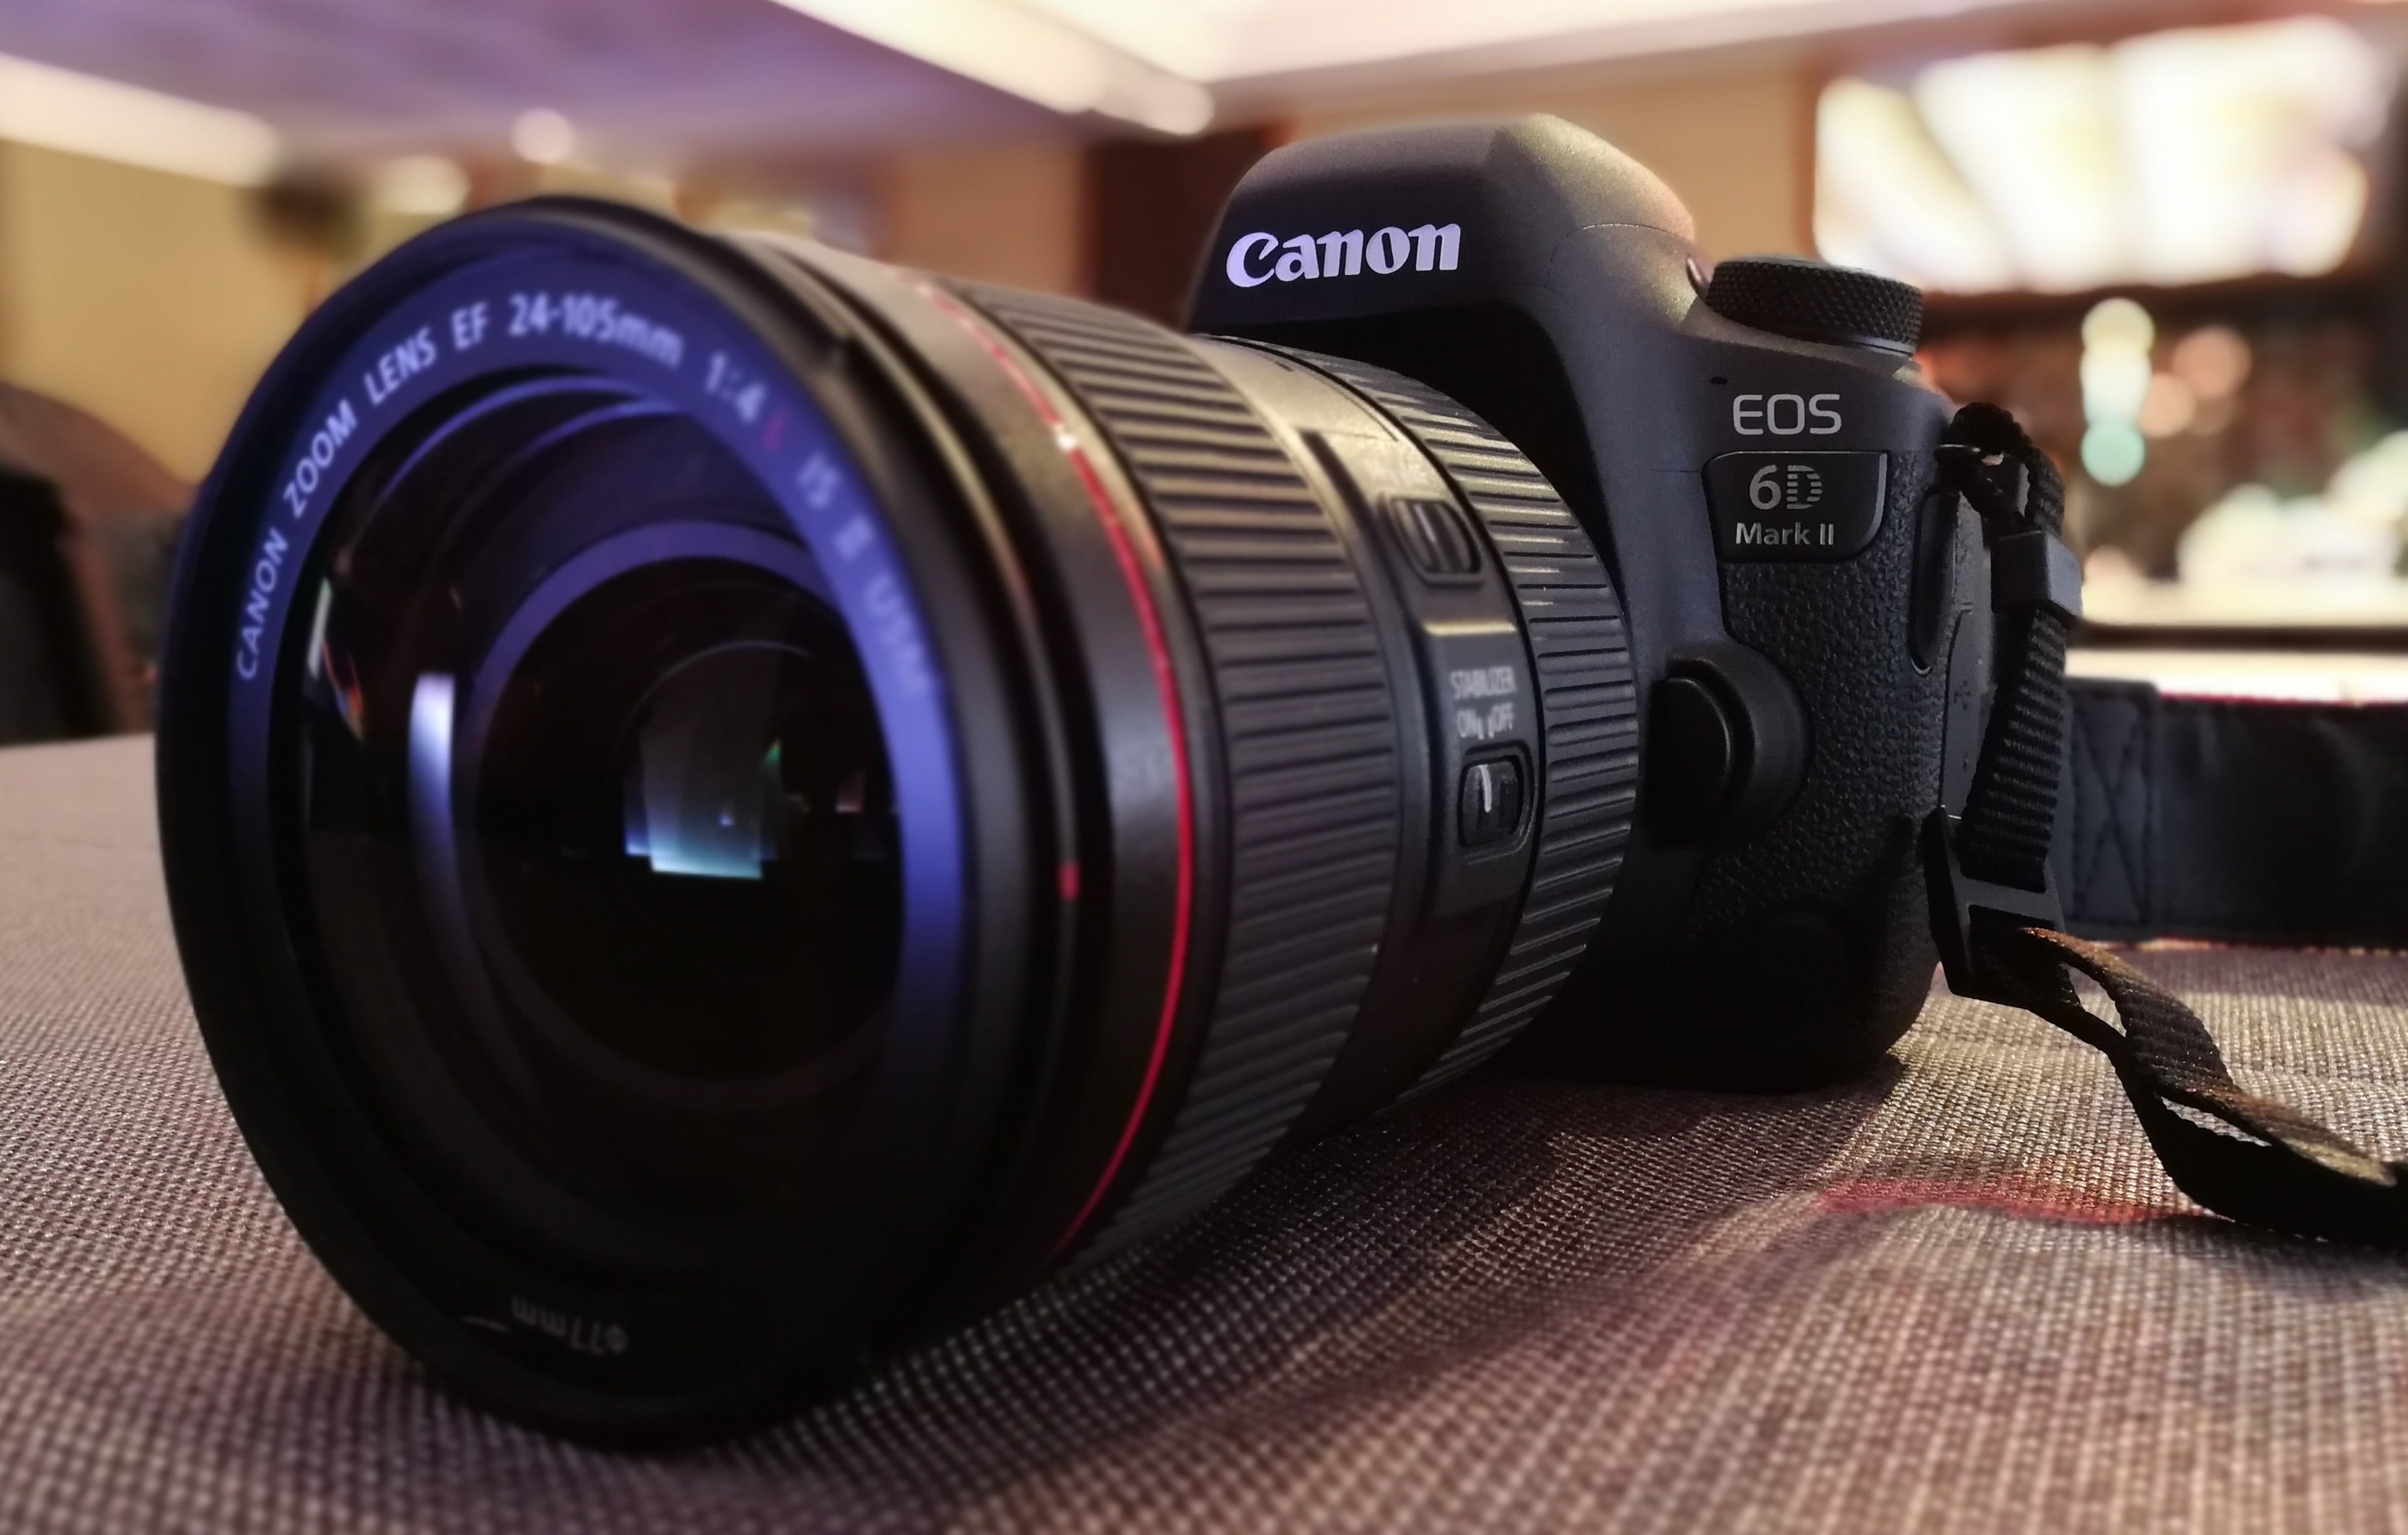 Canon EOS 6D Mark II DSLR launched in India with starting at Rs. 1,32,995 | GizmoManiacs